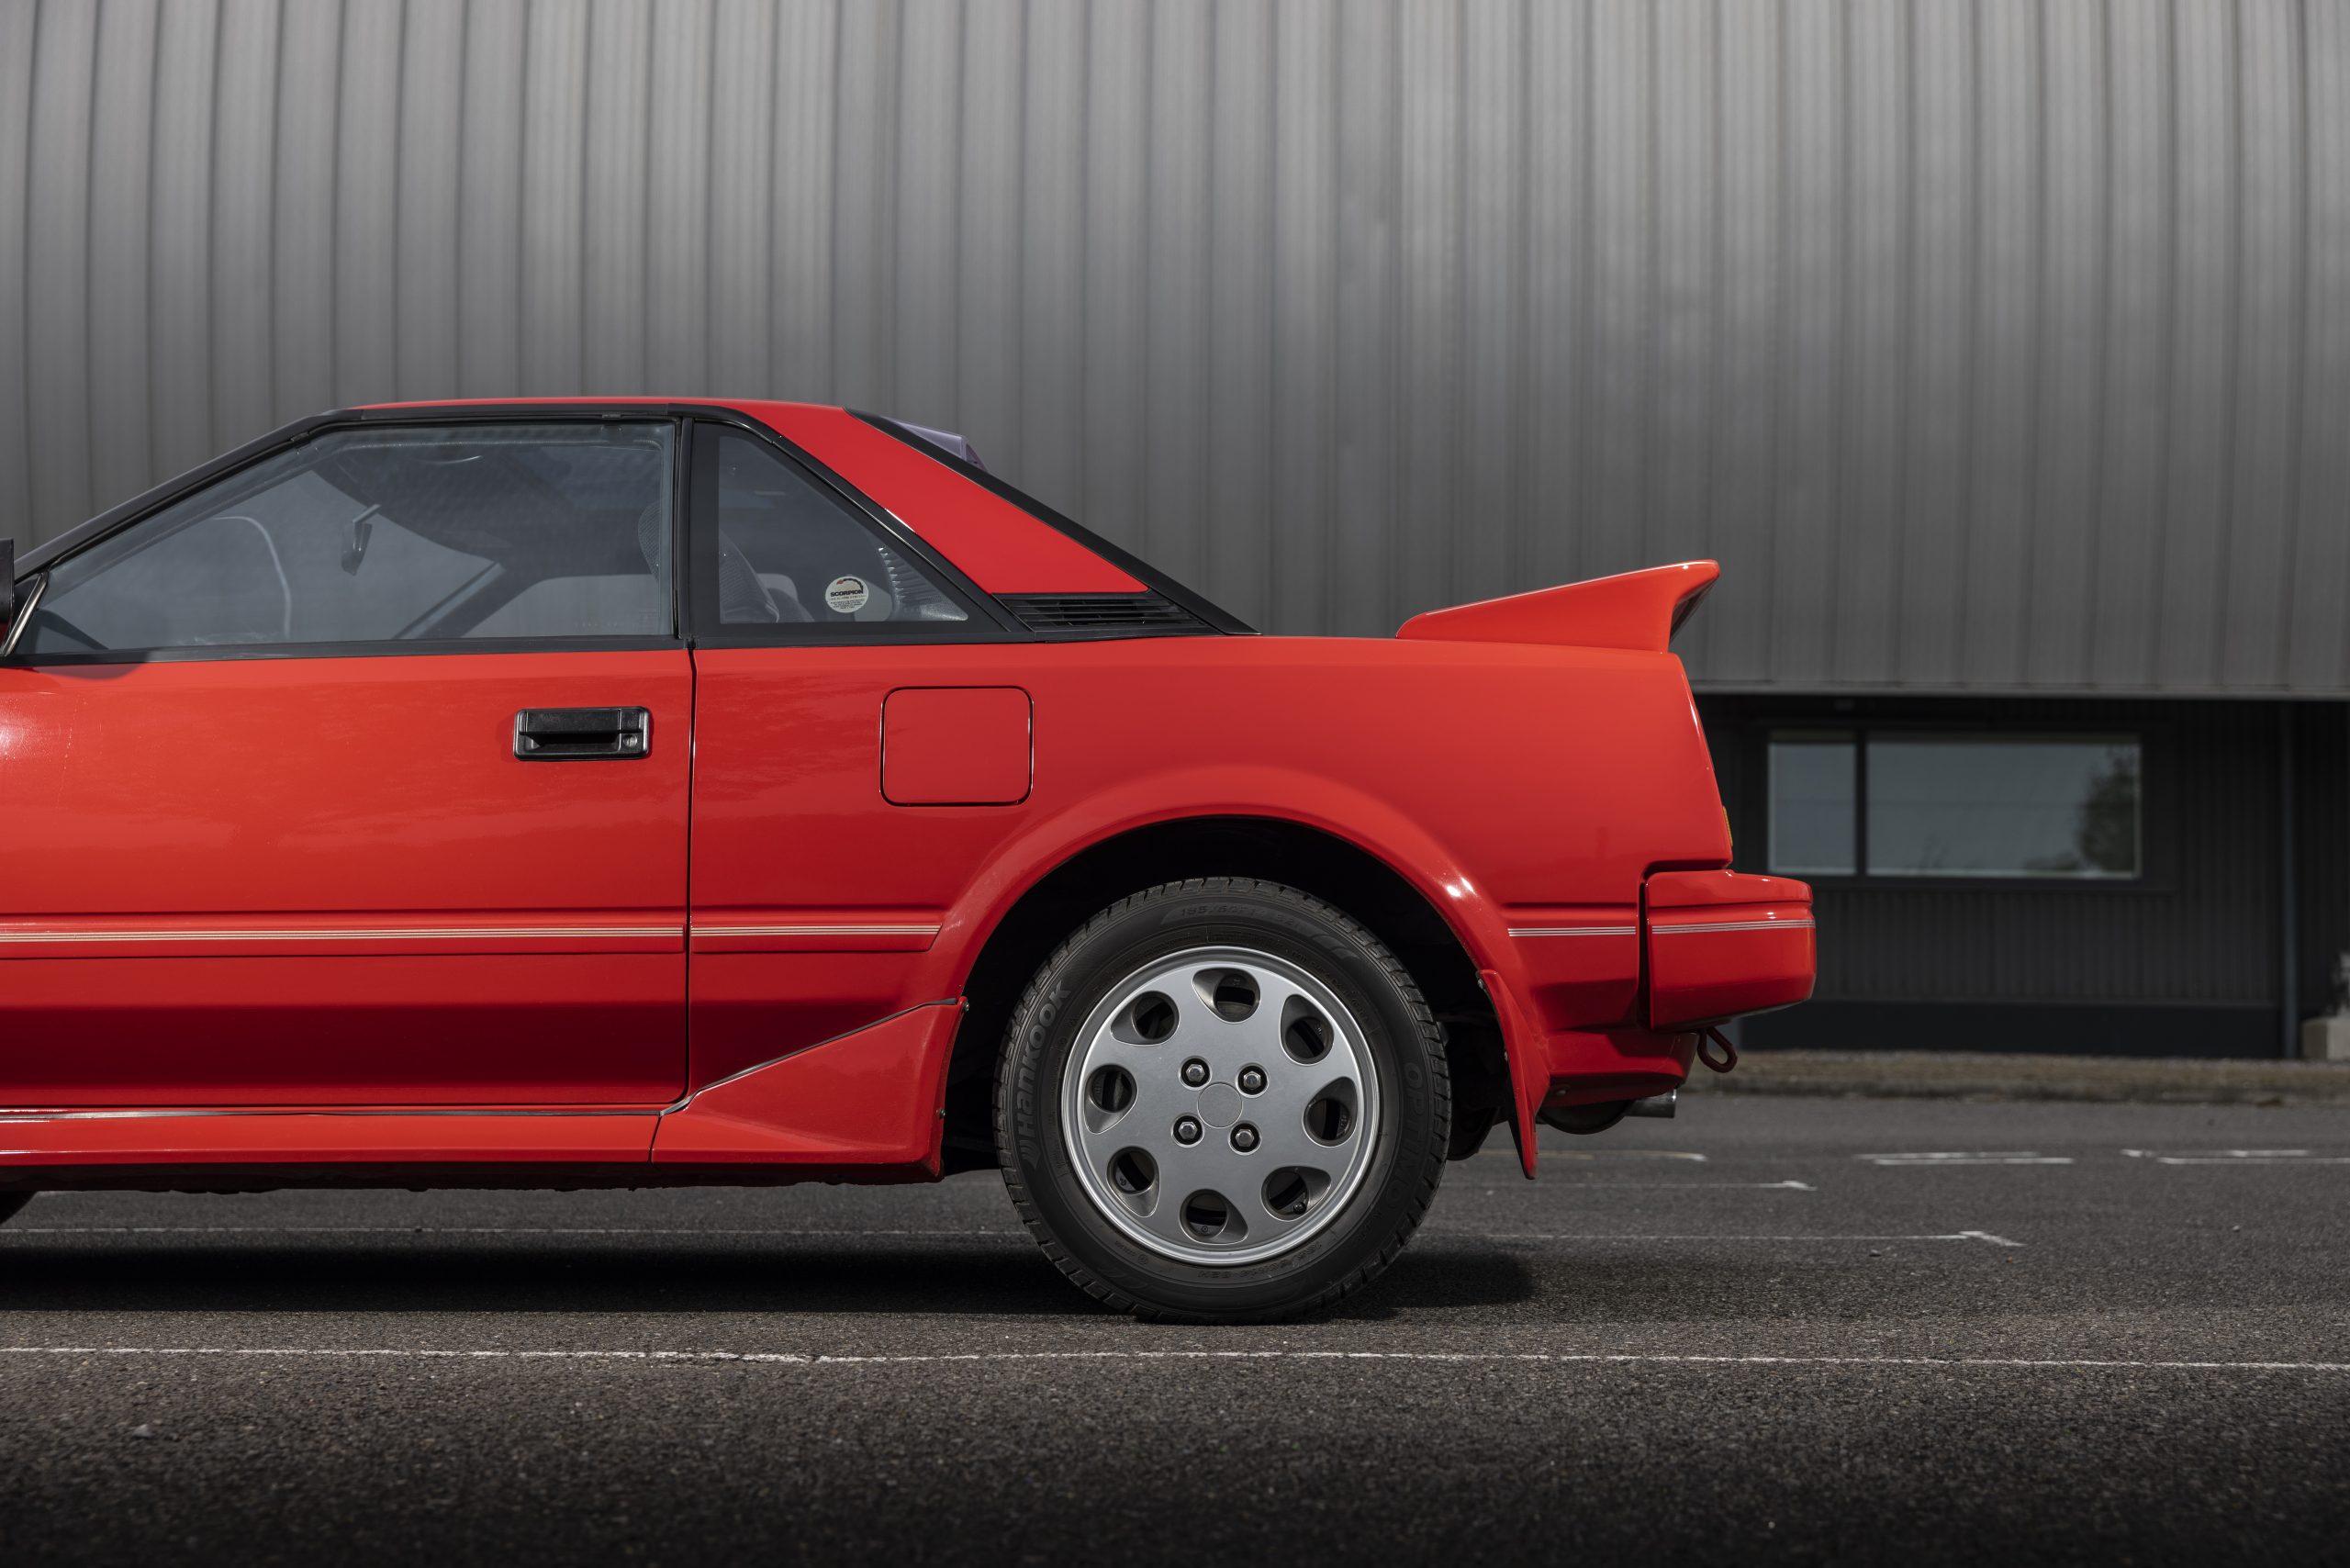 The original Toyota MR2 stole our hearts – and still does